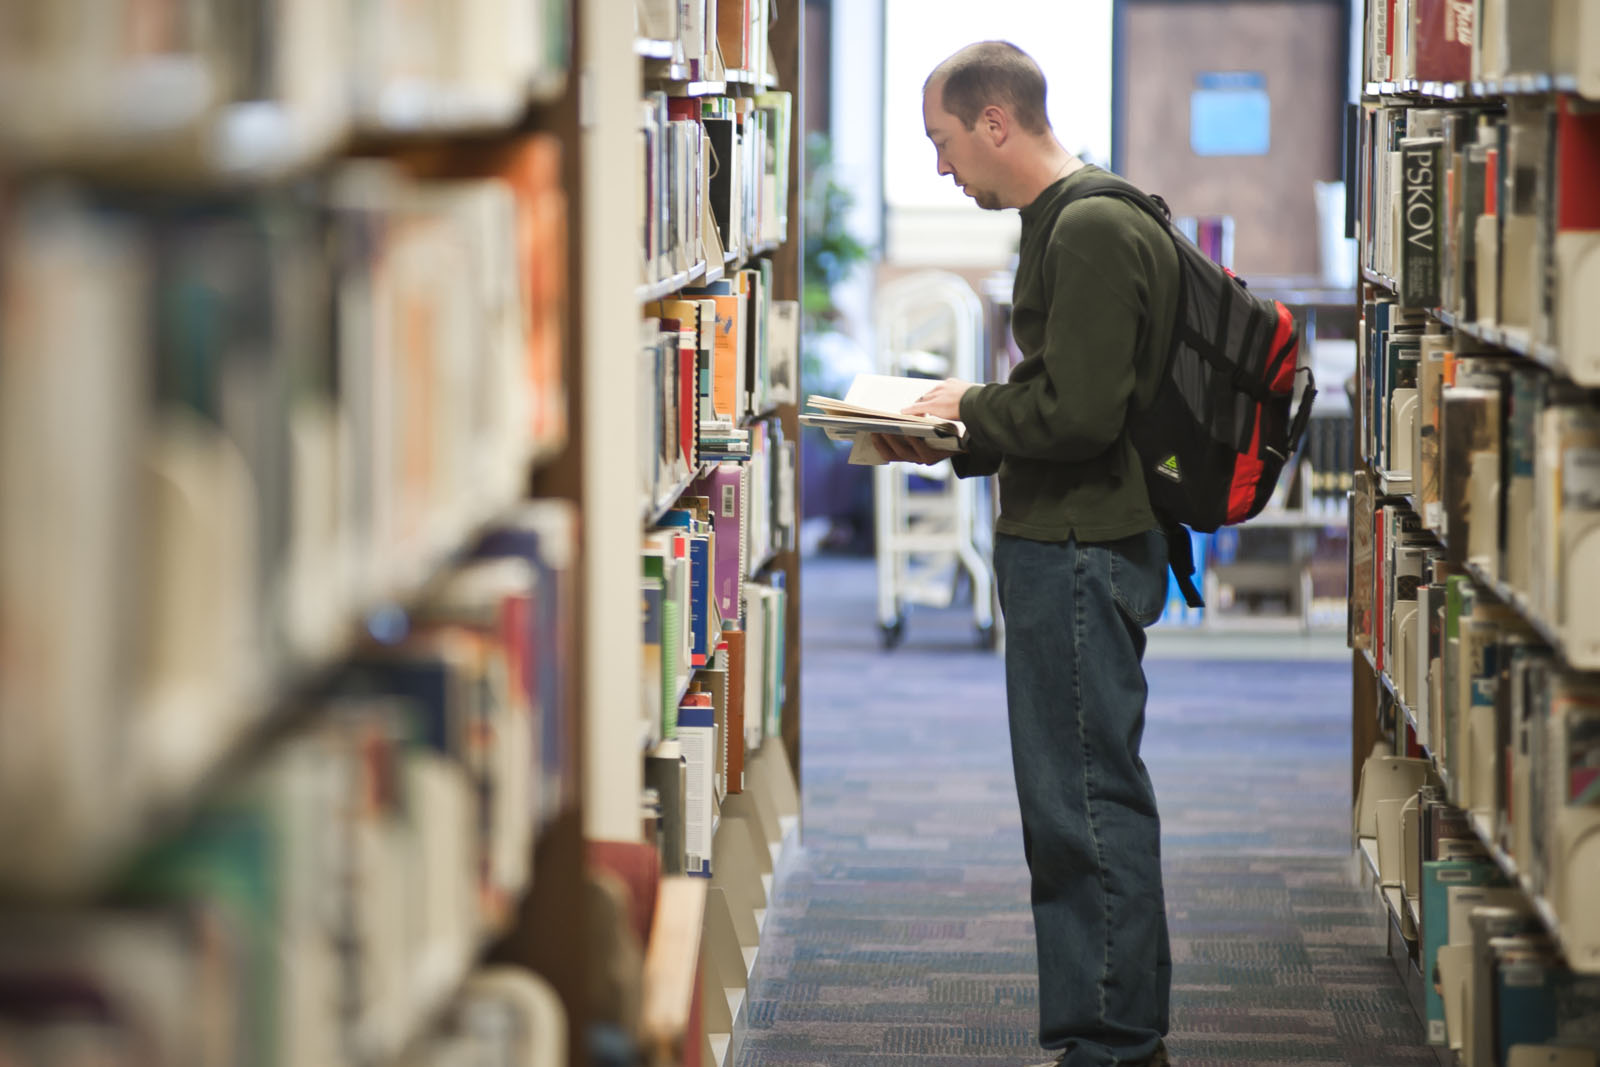 PPSC student browsing library books